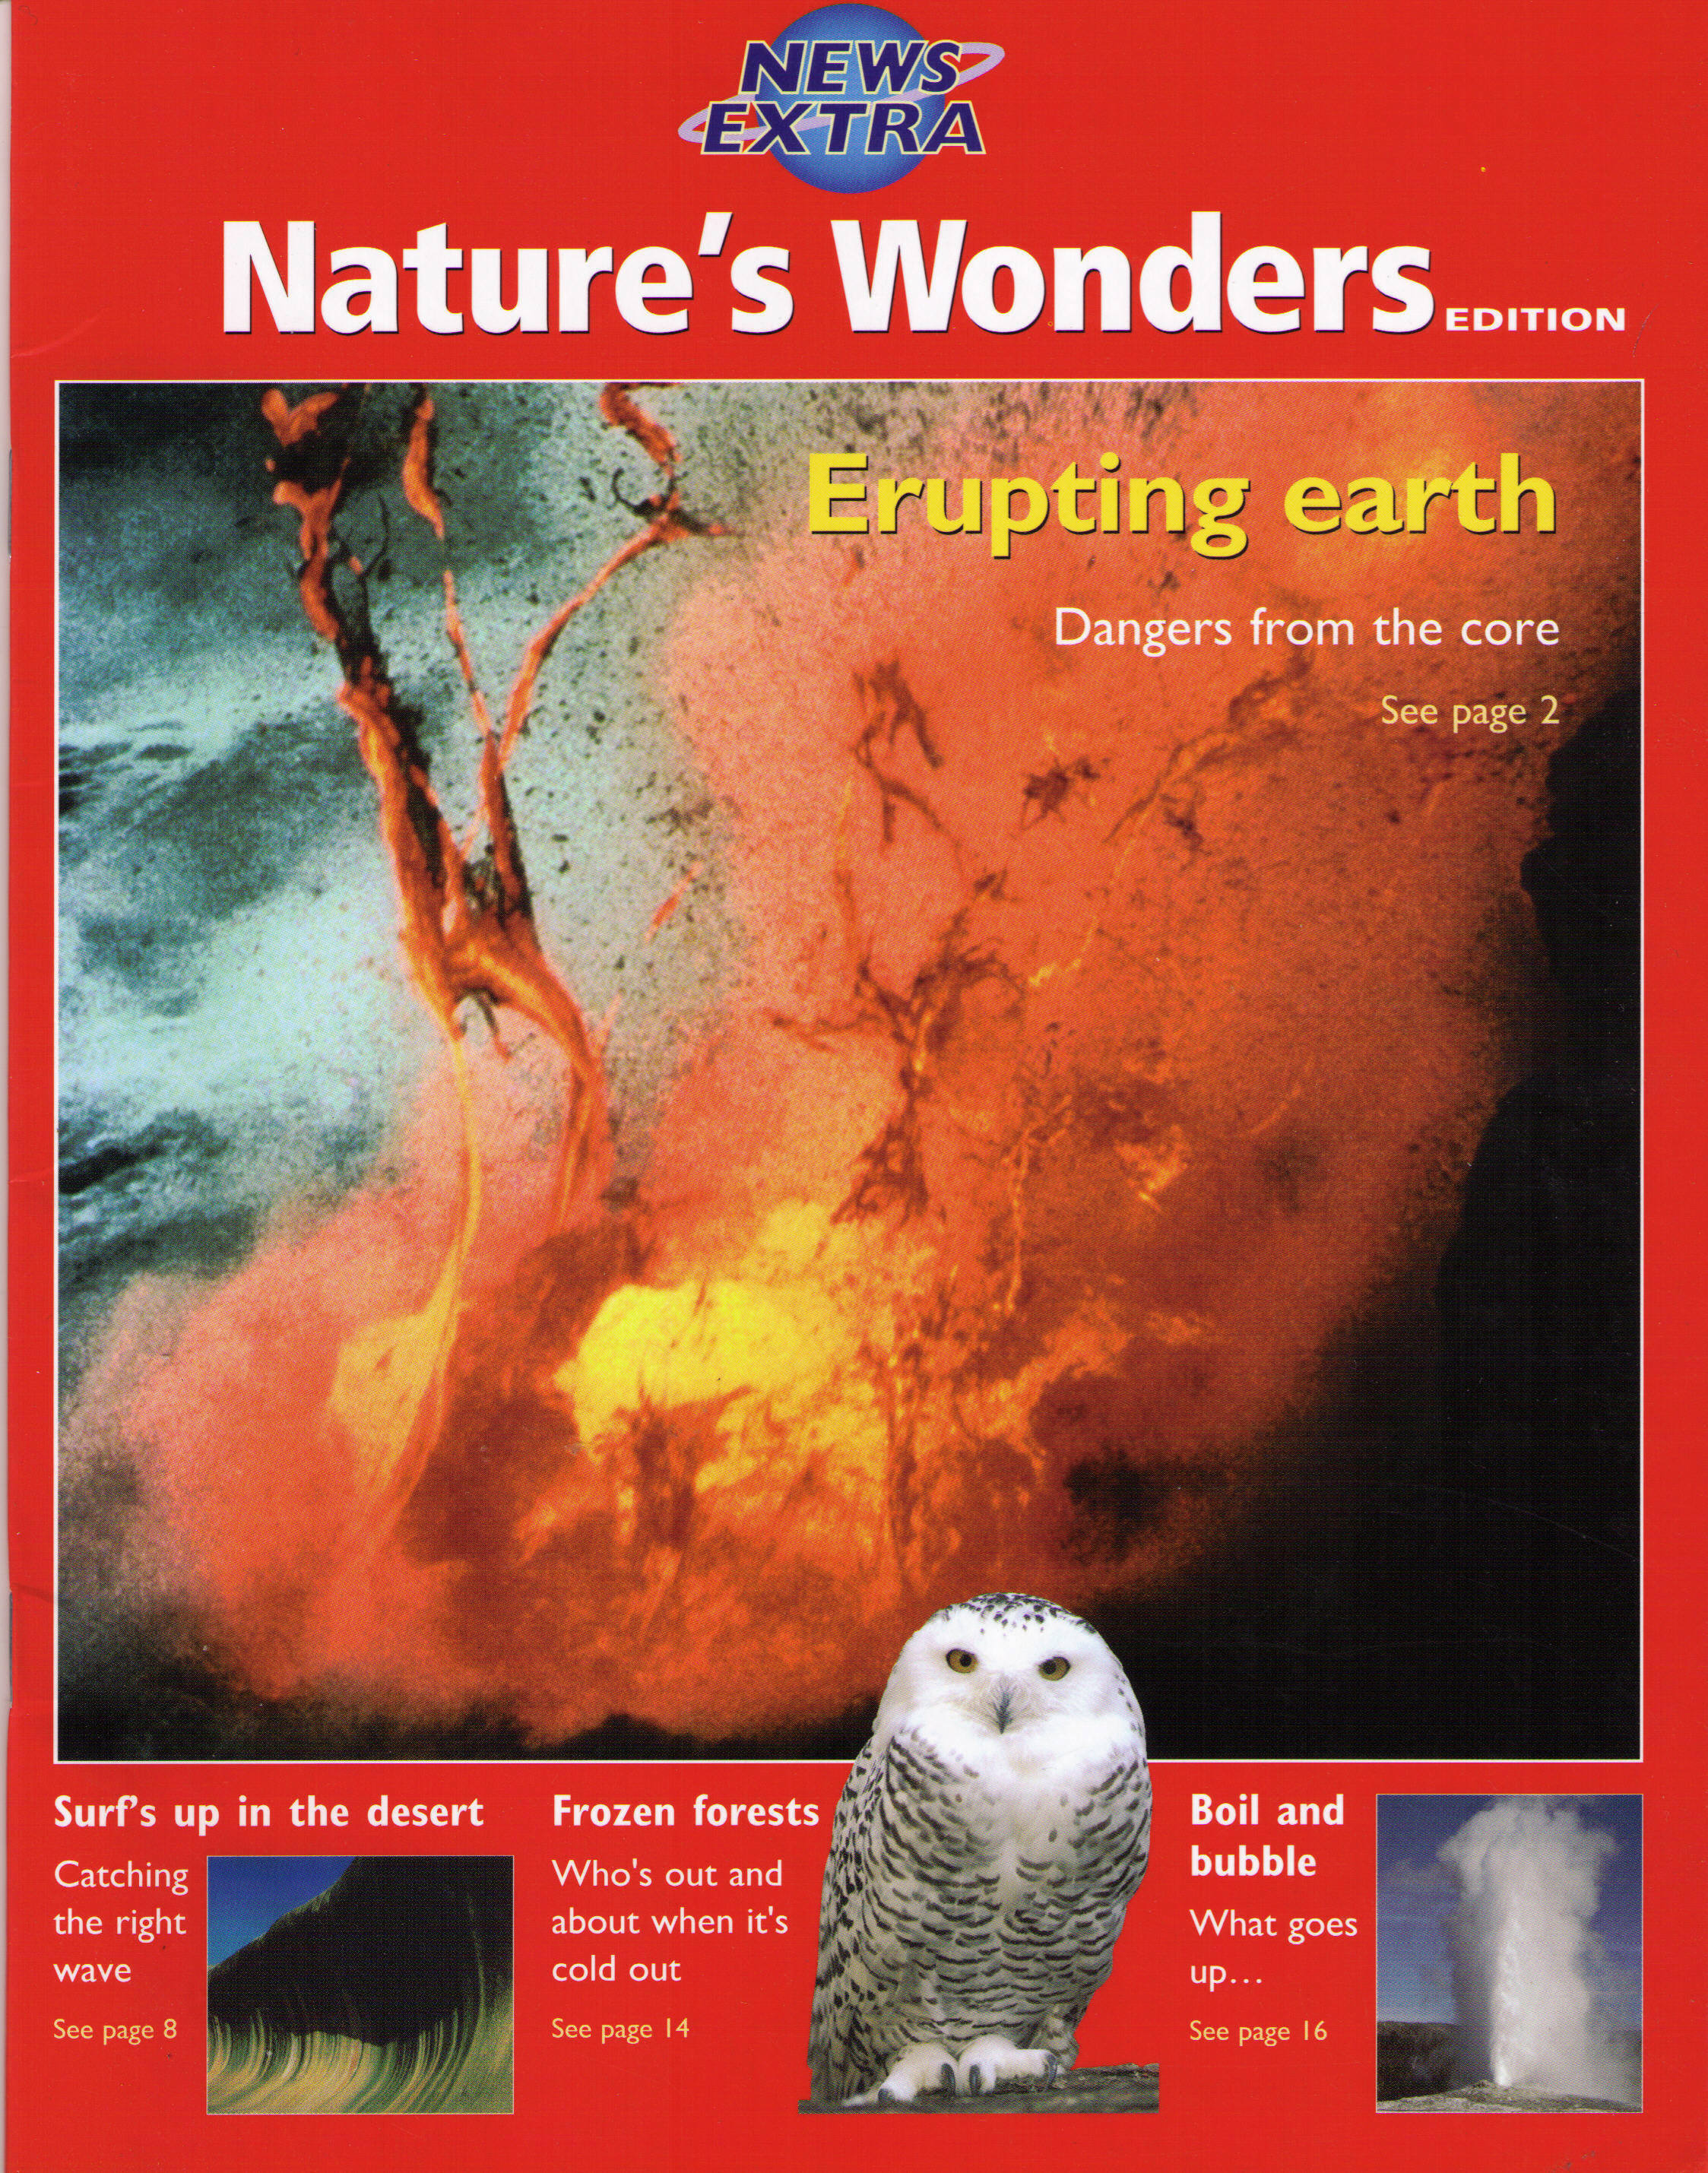 Explore the highs and lows of the ever changing earth. Part of The News Extra series by Horwitz Martin Education.